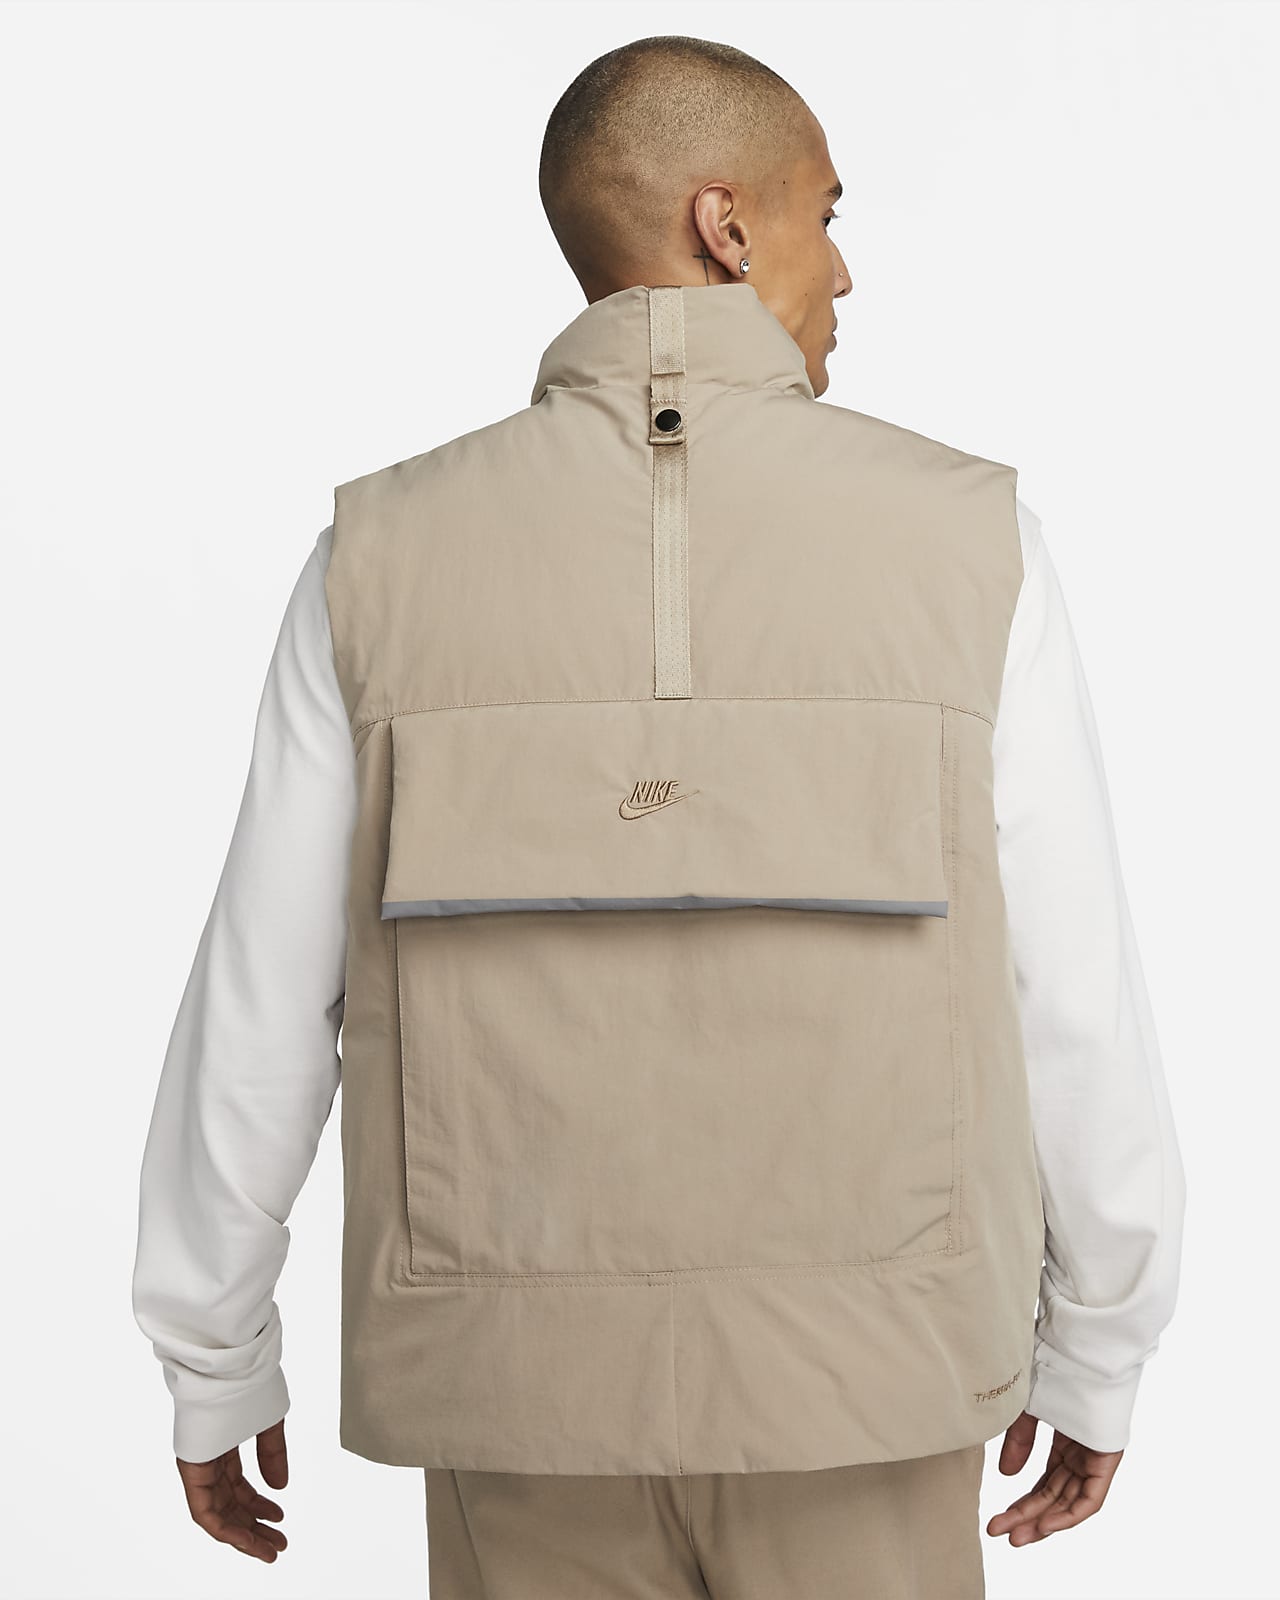 lector vía aguja Nike Sportswear Therma-FIT Tech Pack Men's Insulated Gilet. Nike CA